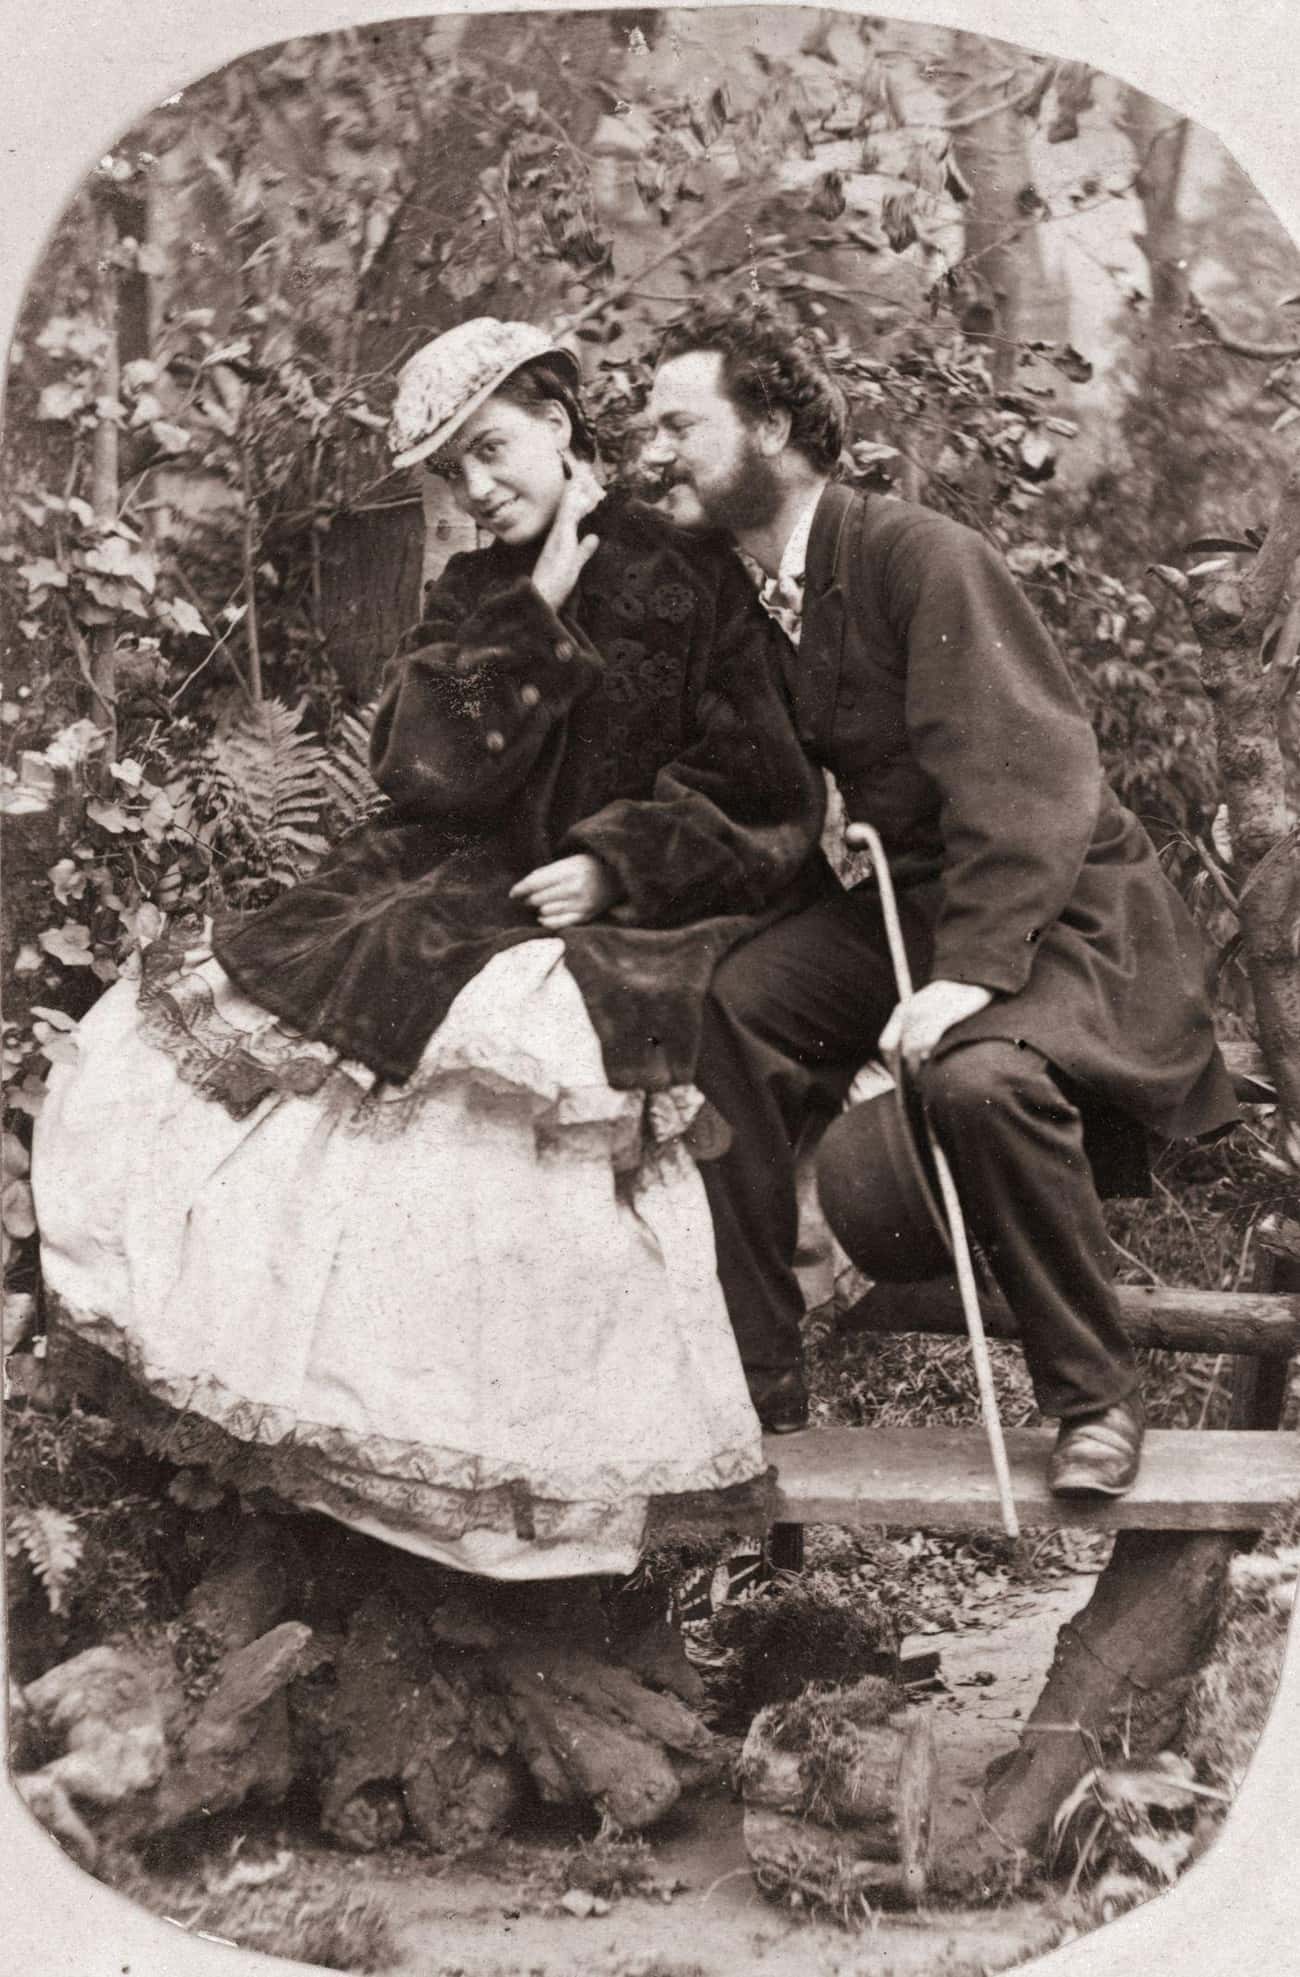 Man Whispers In His Sweetheart's Ear On A Country Walk, Date Unknown 